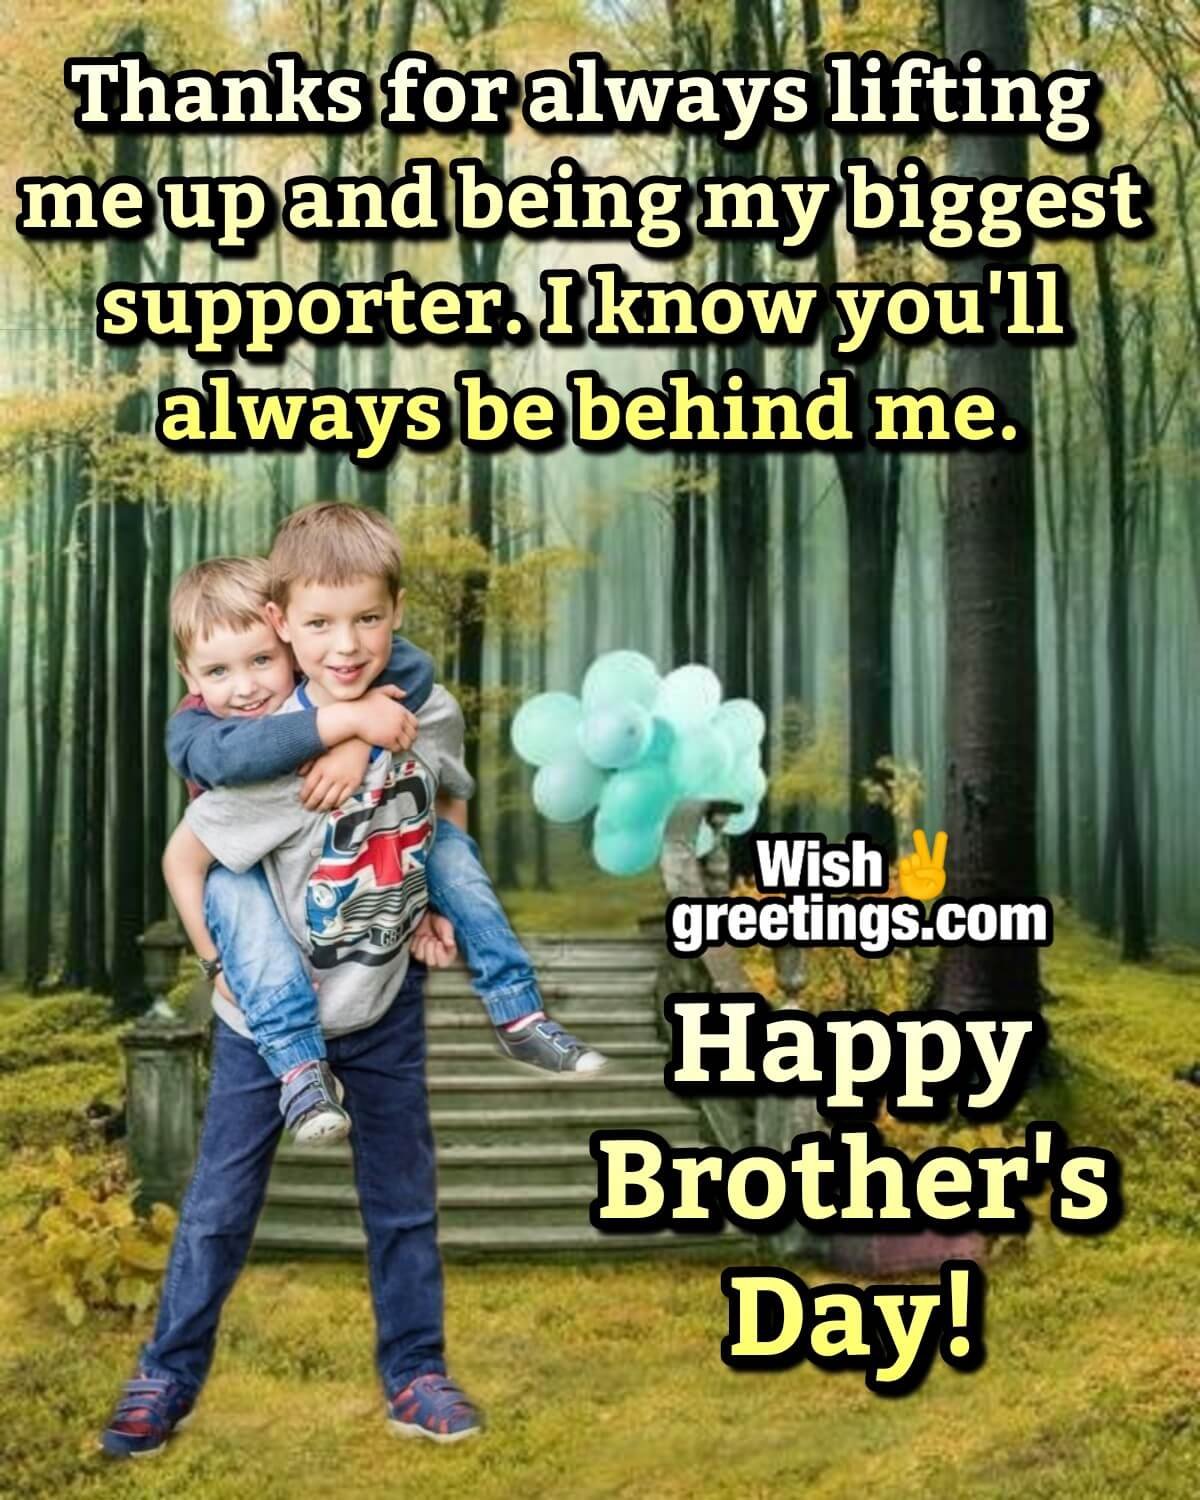 Happy Brothers Day Image